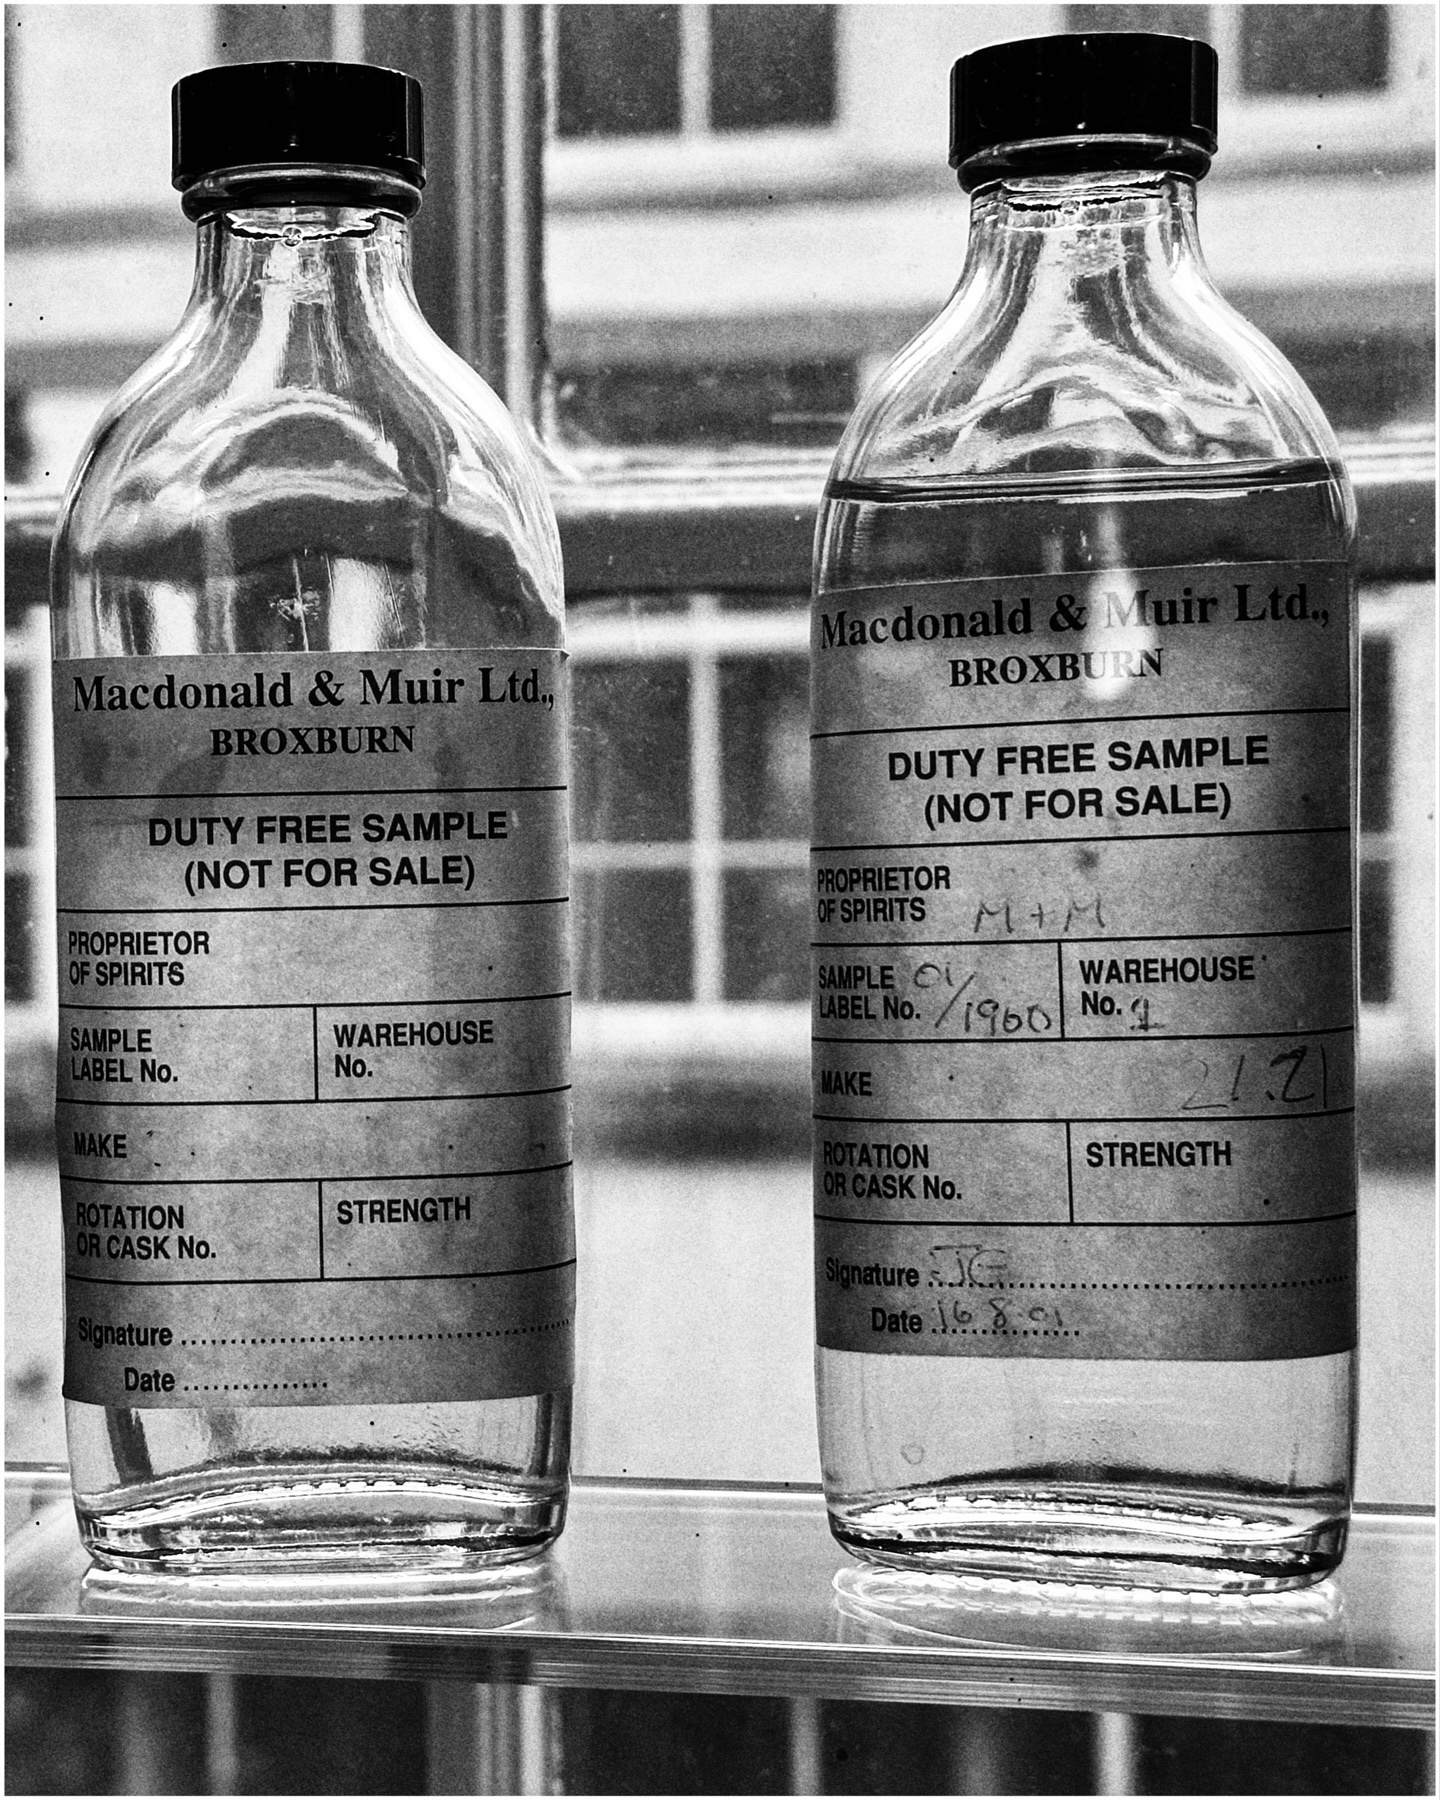 Two glass bottles with black caps, labeled "Macdonald & Muir Ltd, Broxburn," marked as "DUTY FREE SAMPLE (NOT FOR SALE)," with additional details filled out in handwriting. They are set against a window